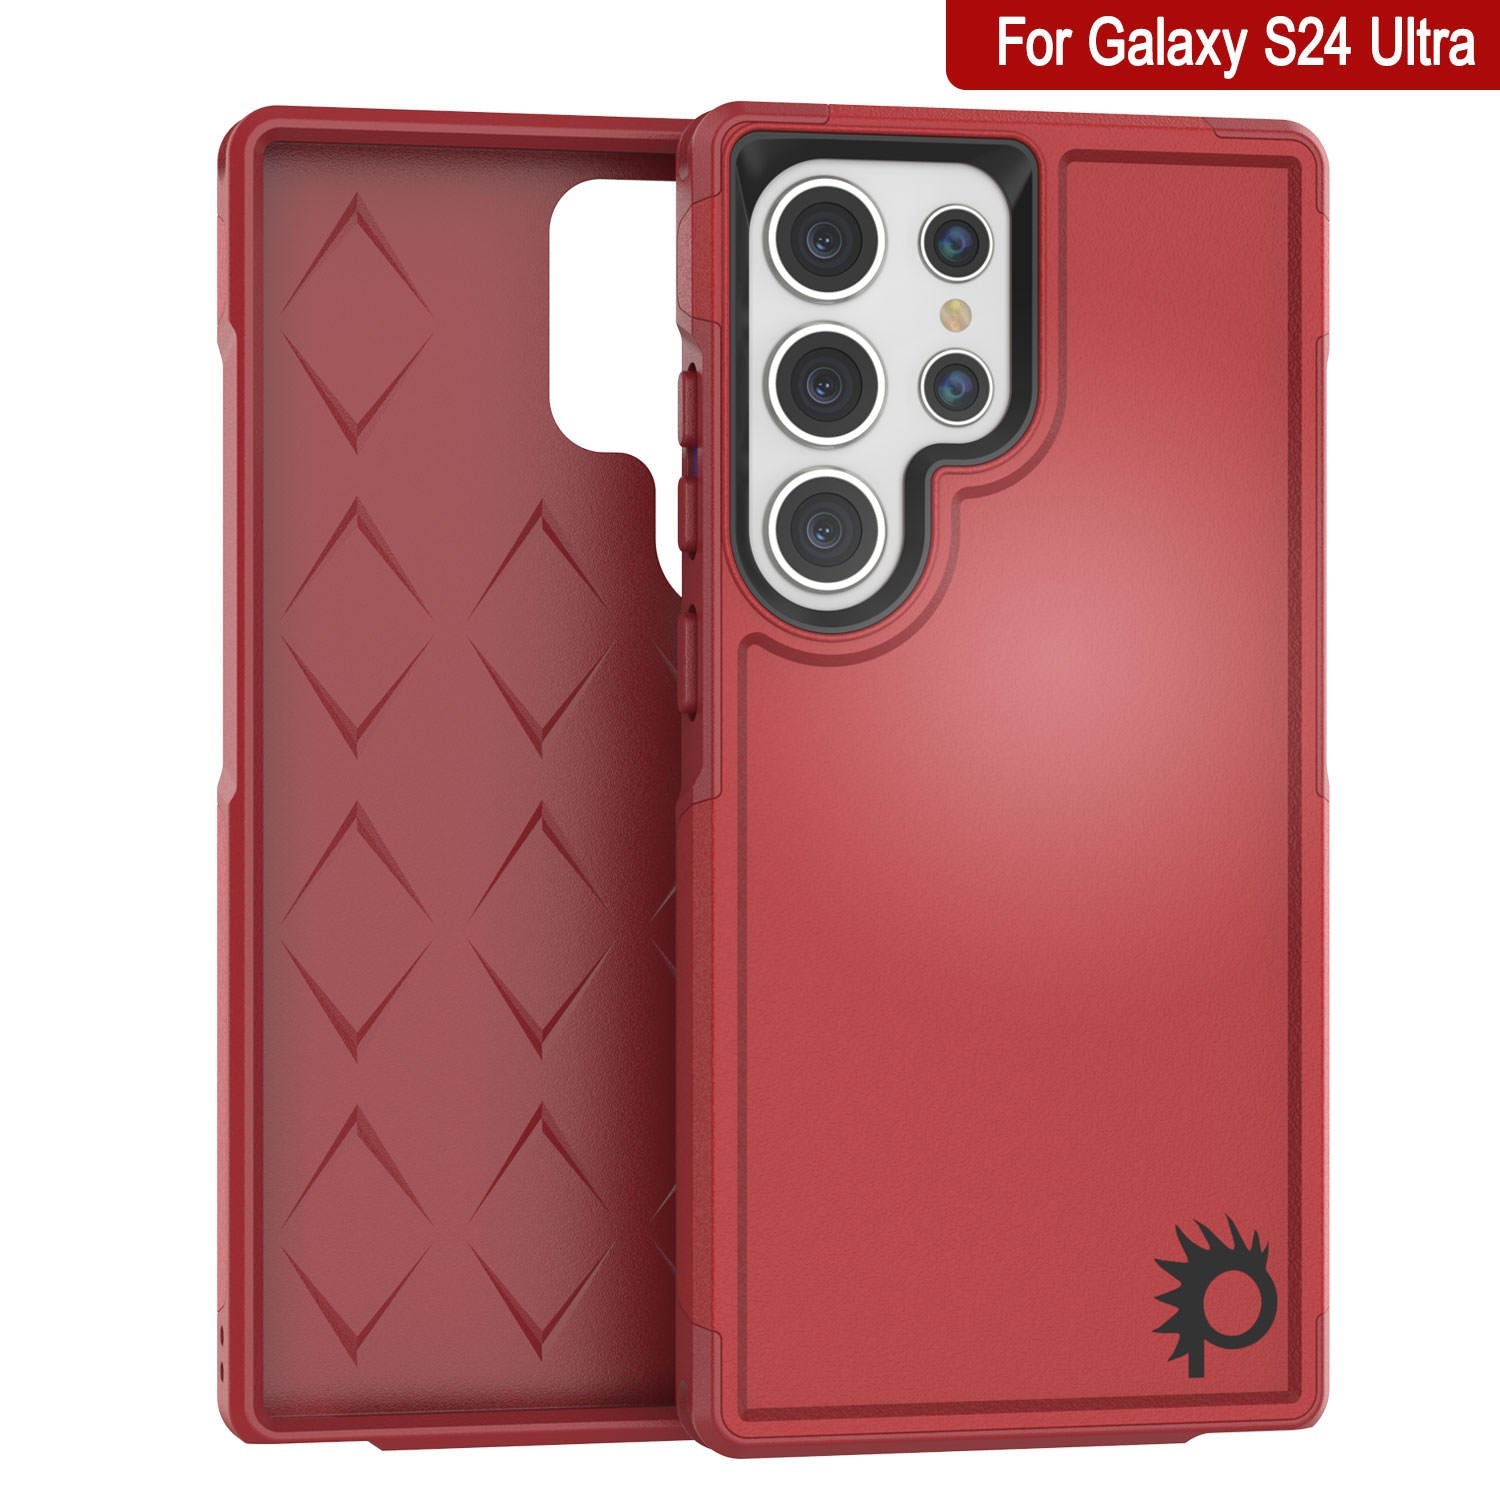 PunkCase Galaxy S24 Ultra Case, [Spartan 2.0 Series] Clear Rugged Heavy Duty Cover [Red]